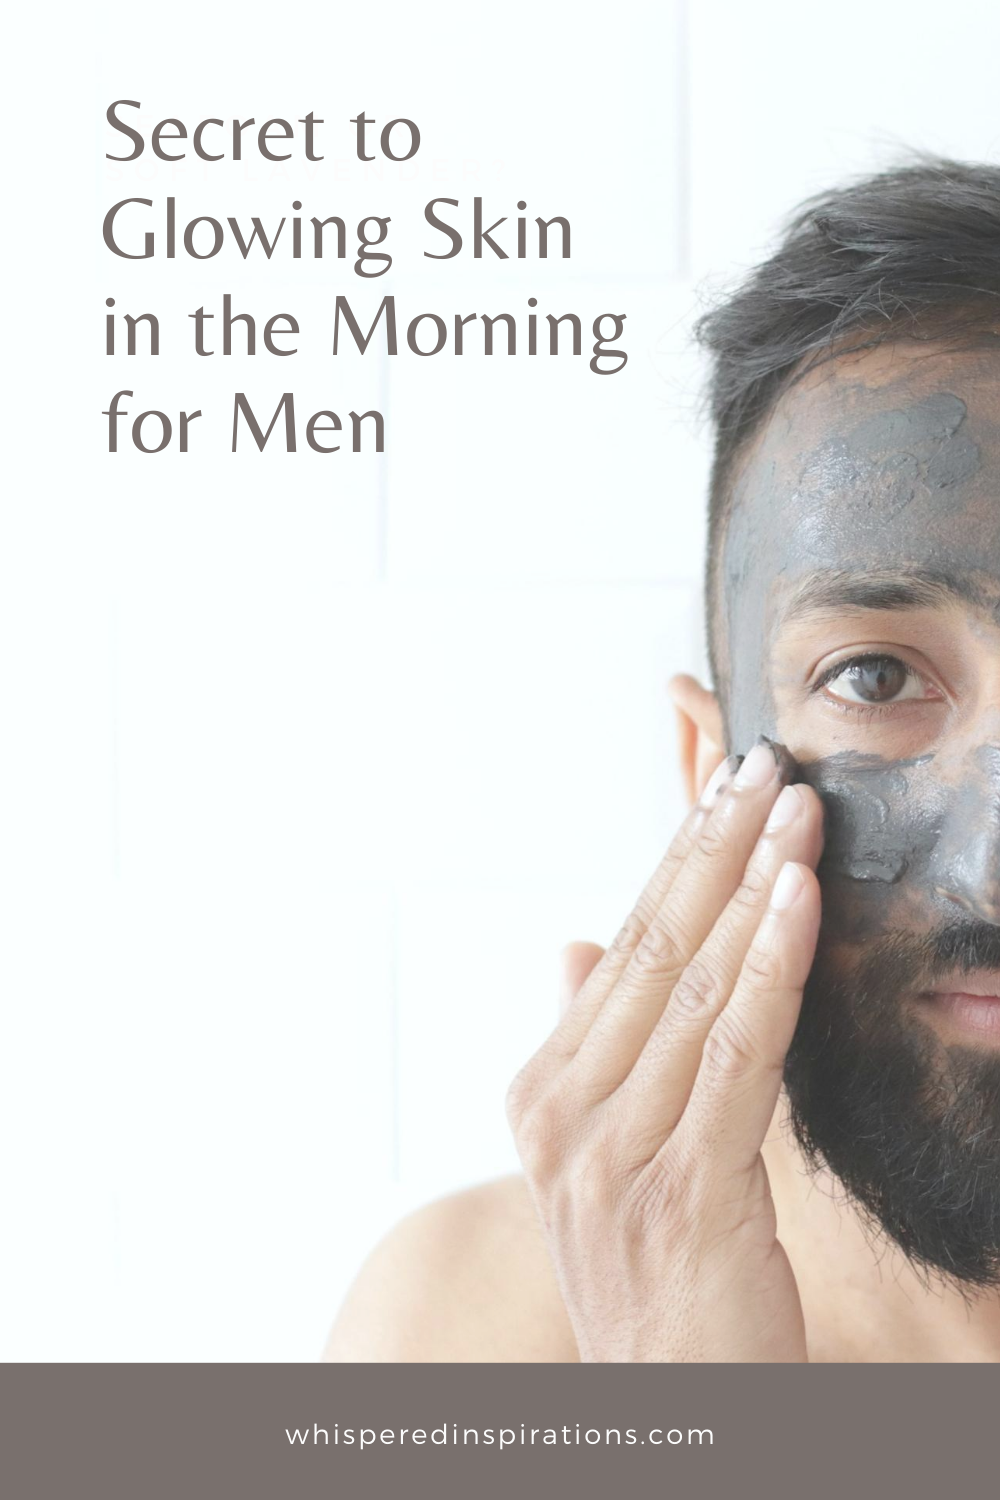 Man puts clay mask on his face and looks straight ahead. A banner reads, "Secret to Glowing Skin in the Morning for Men."